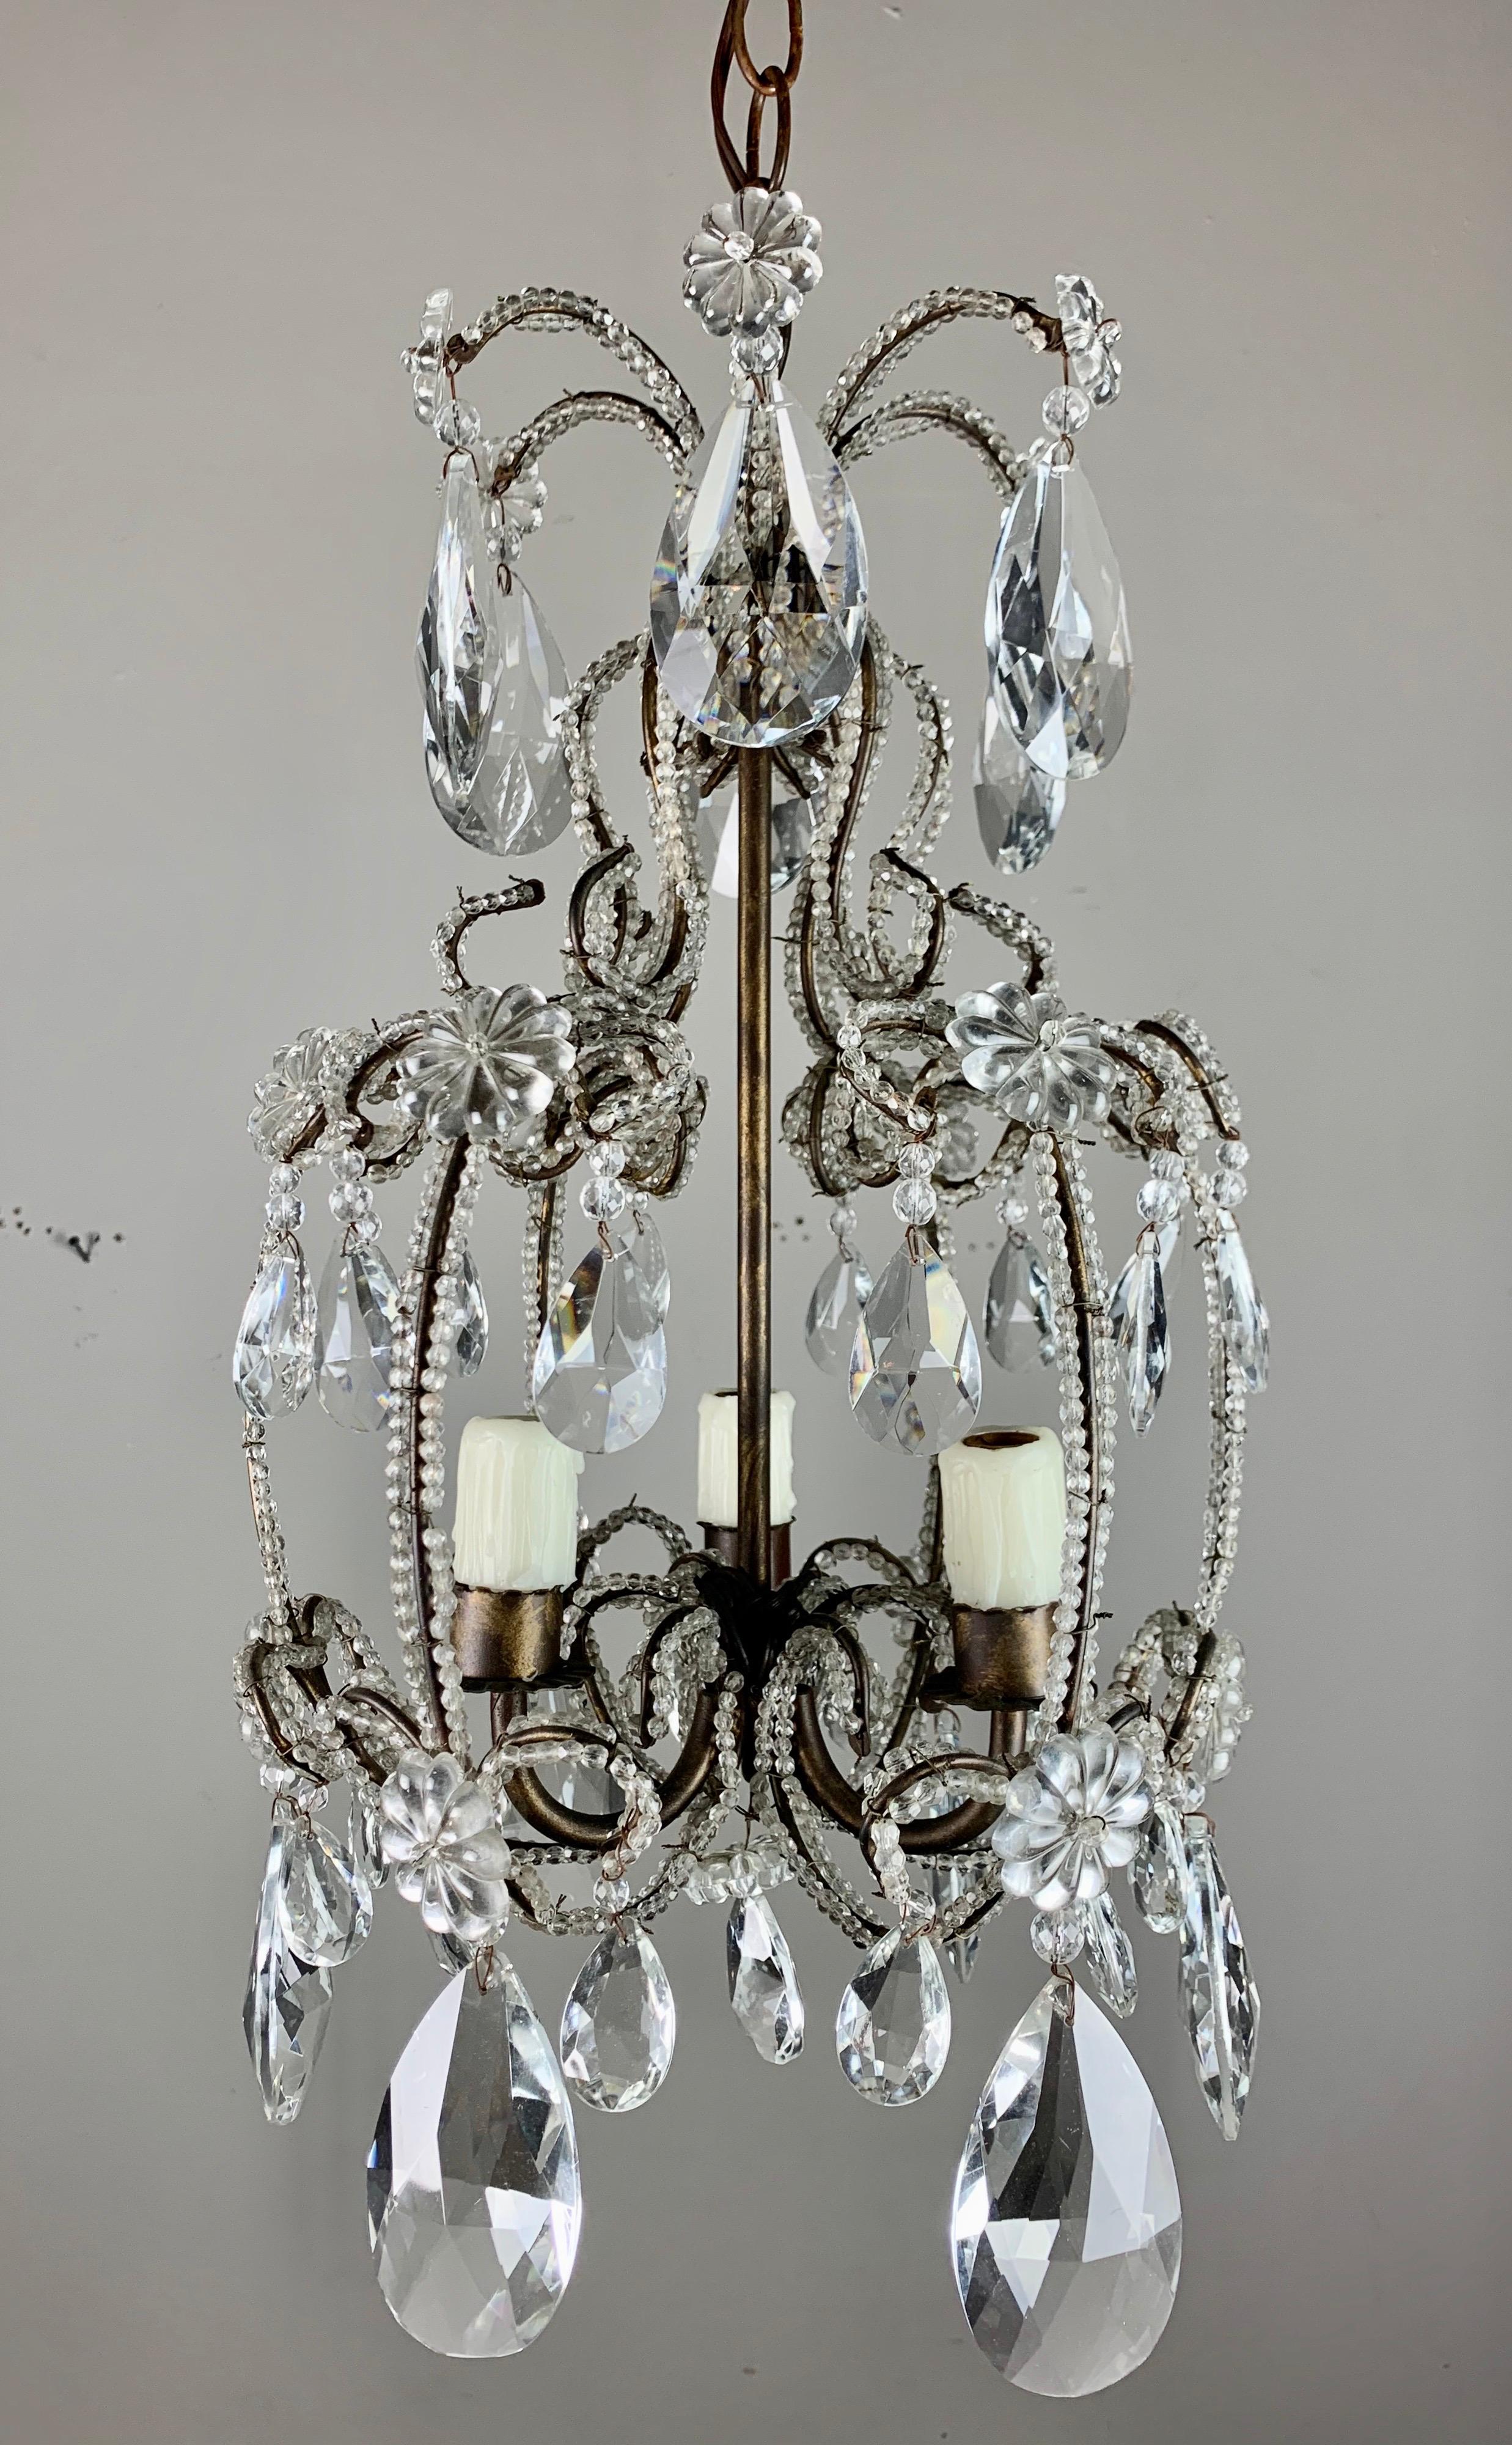 Italian 3-light crystal beaded arm chandelier with beautiful faceted almond shaped crystals. Newly rewired and includes chain and canopy.